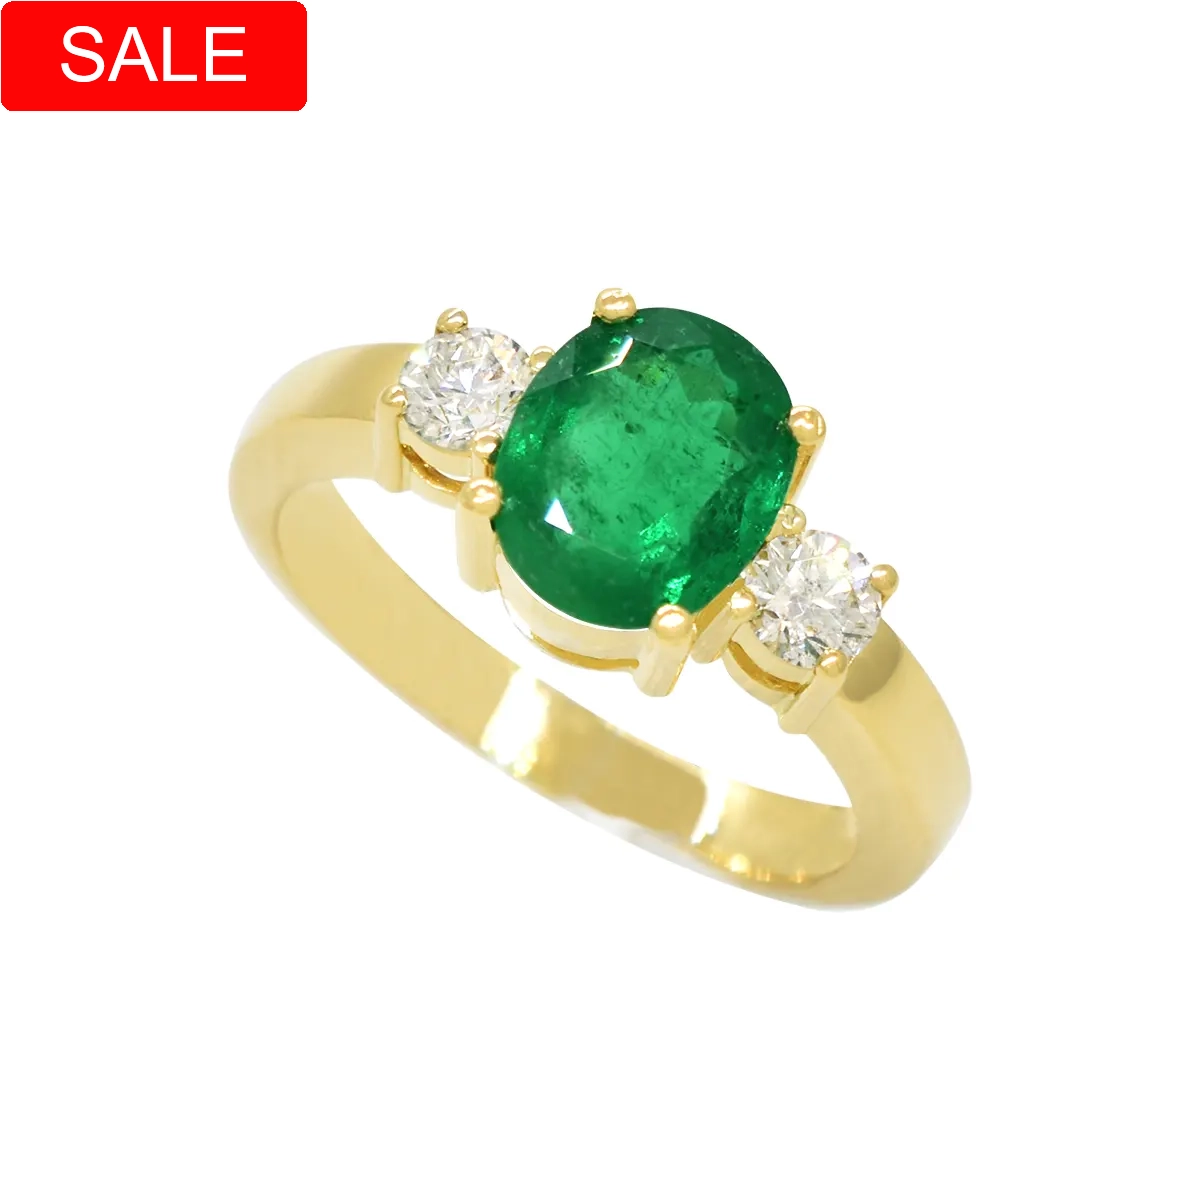 3 stones emerald and diamond ring in solid 18K yellow gold with 1.45 Ct. oval shape natural Colombian emerald and 0.30 Ct. t.w. in 2 round cut diamonds